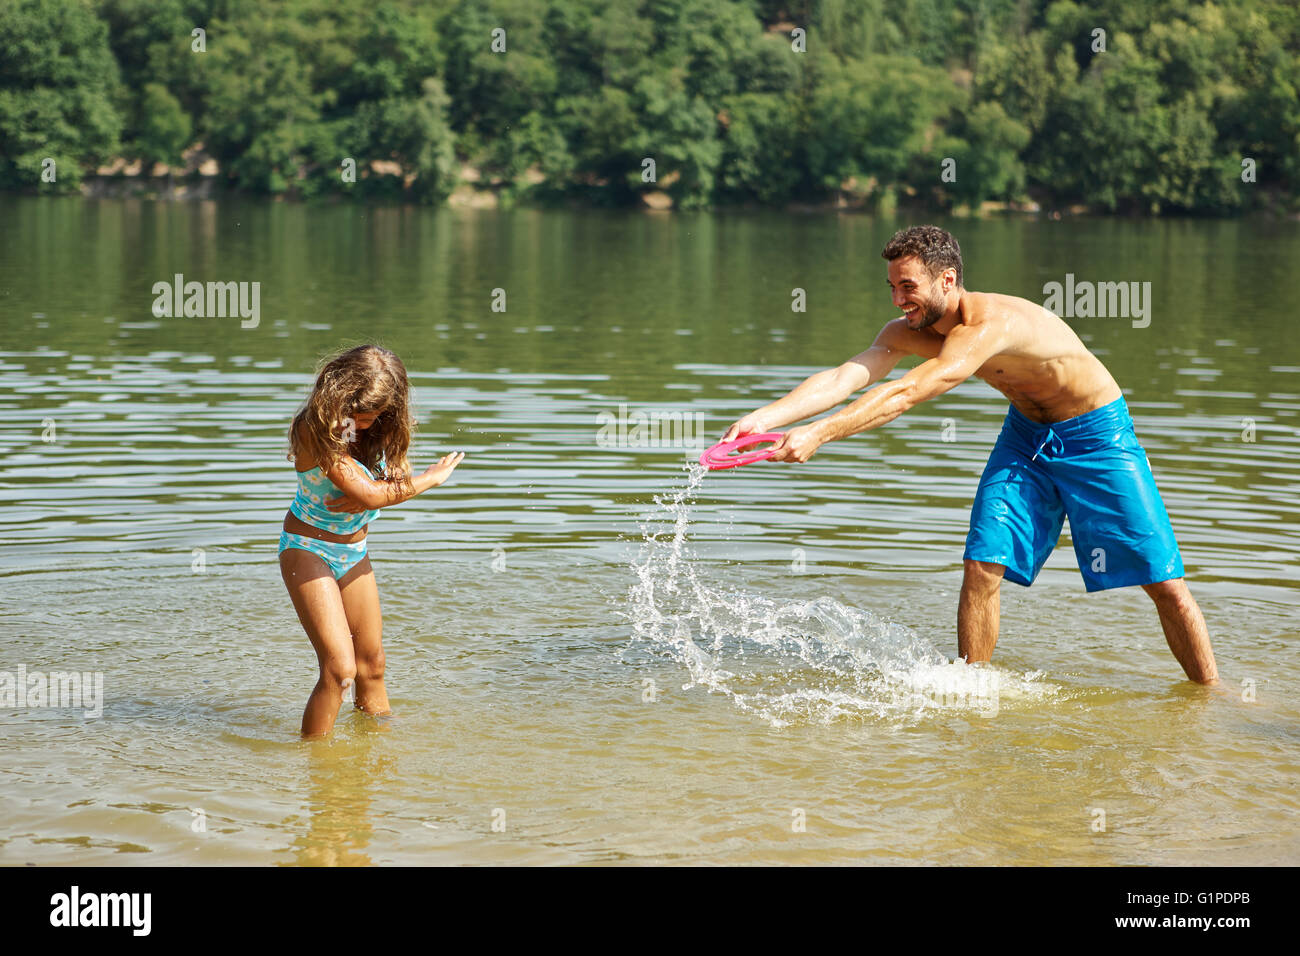 Father and daugher splashing each other with water at a lake Stock Photo